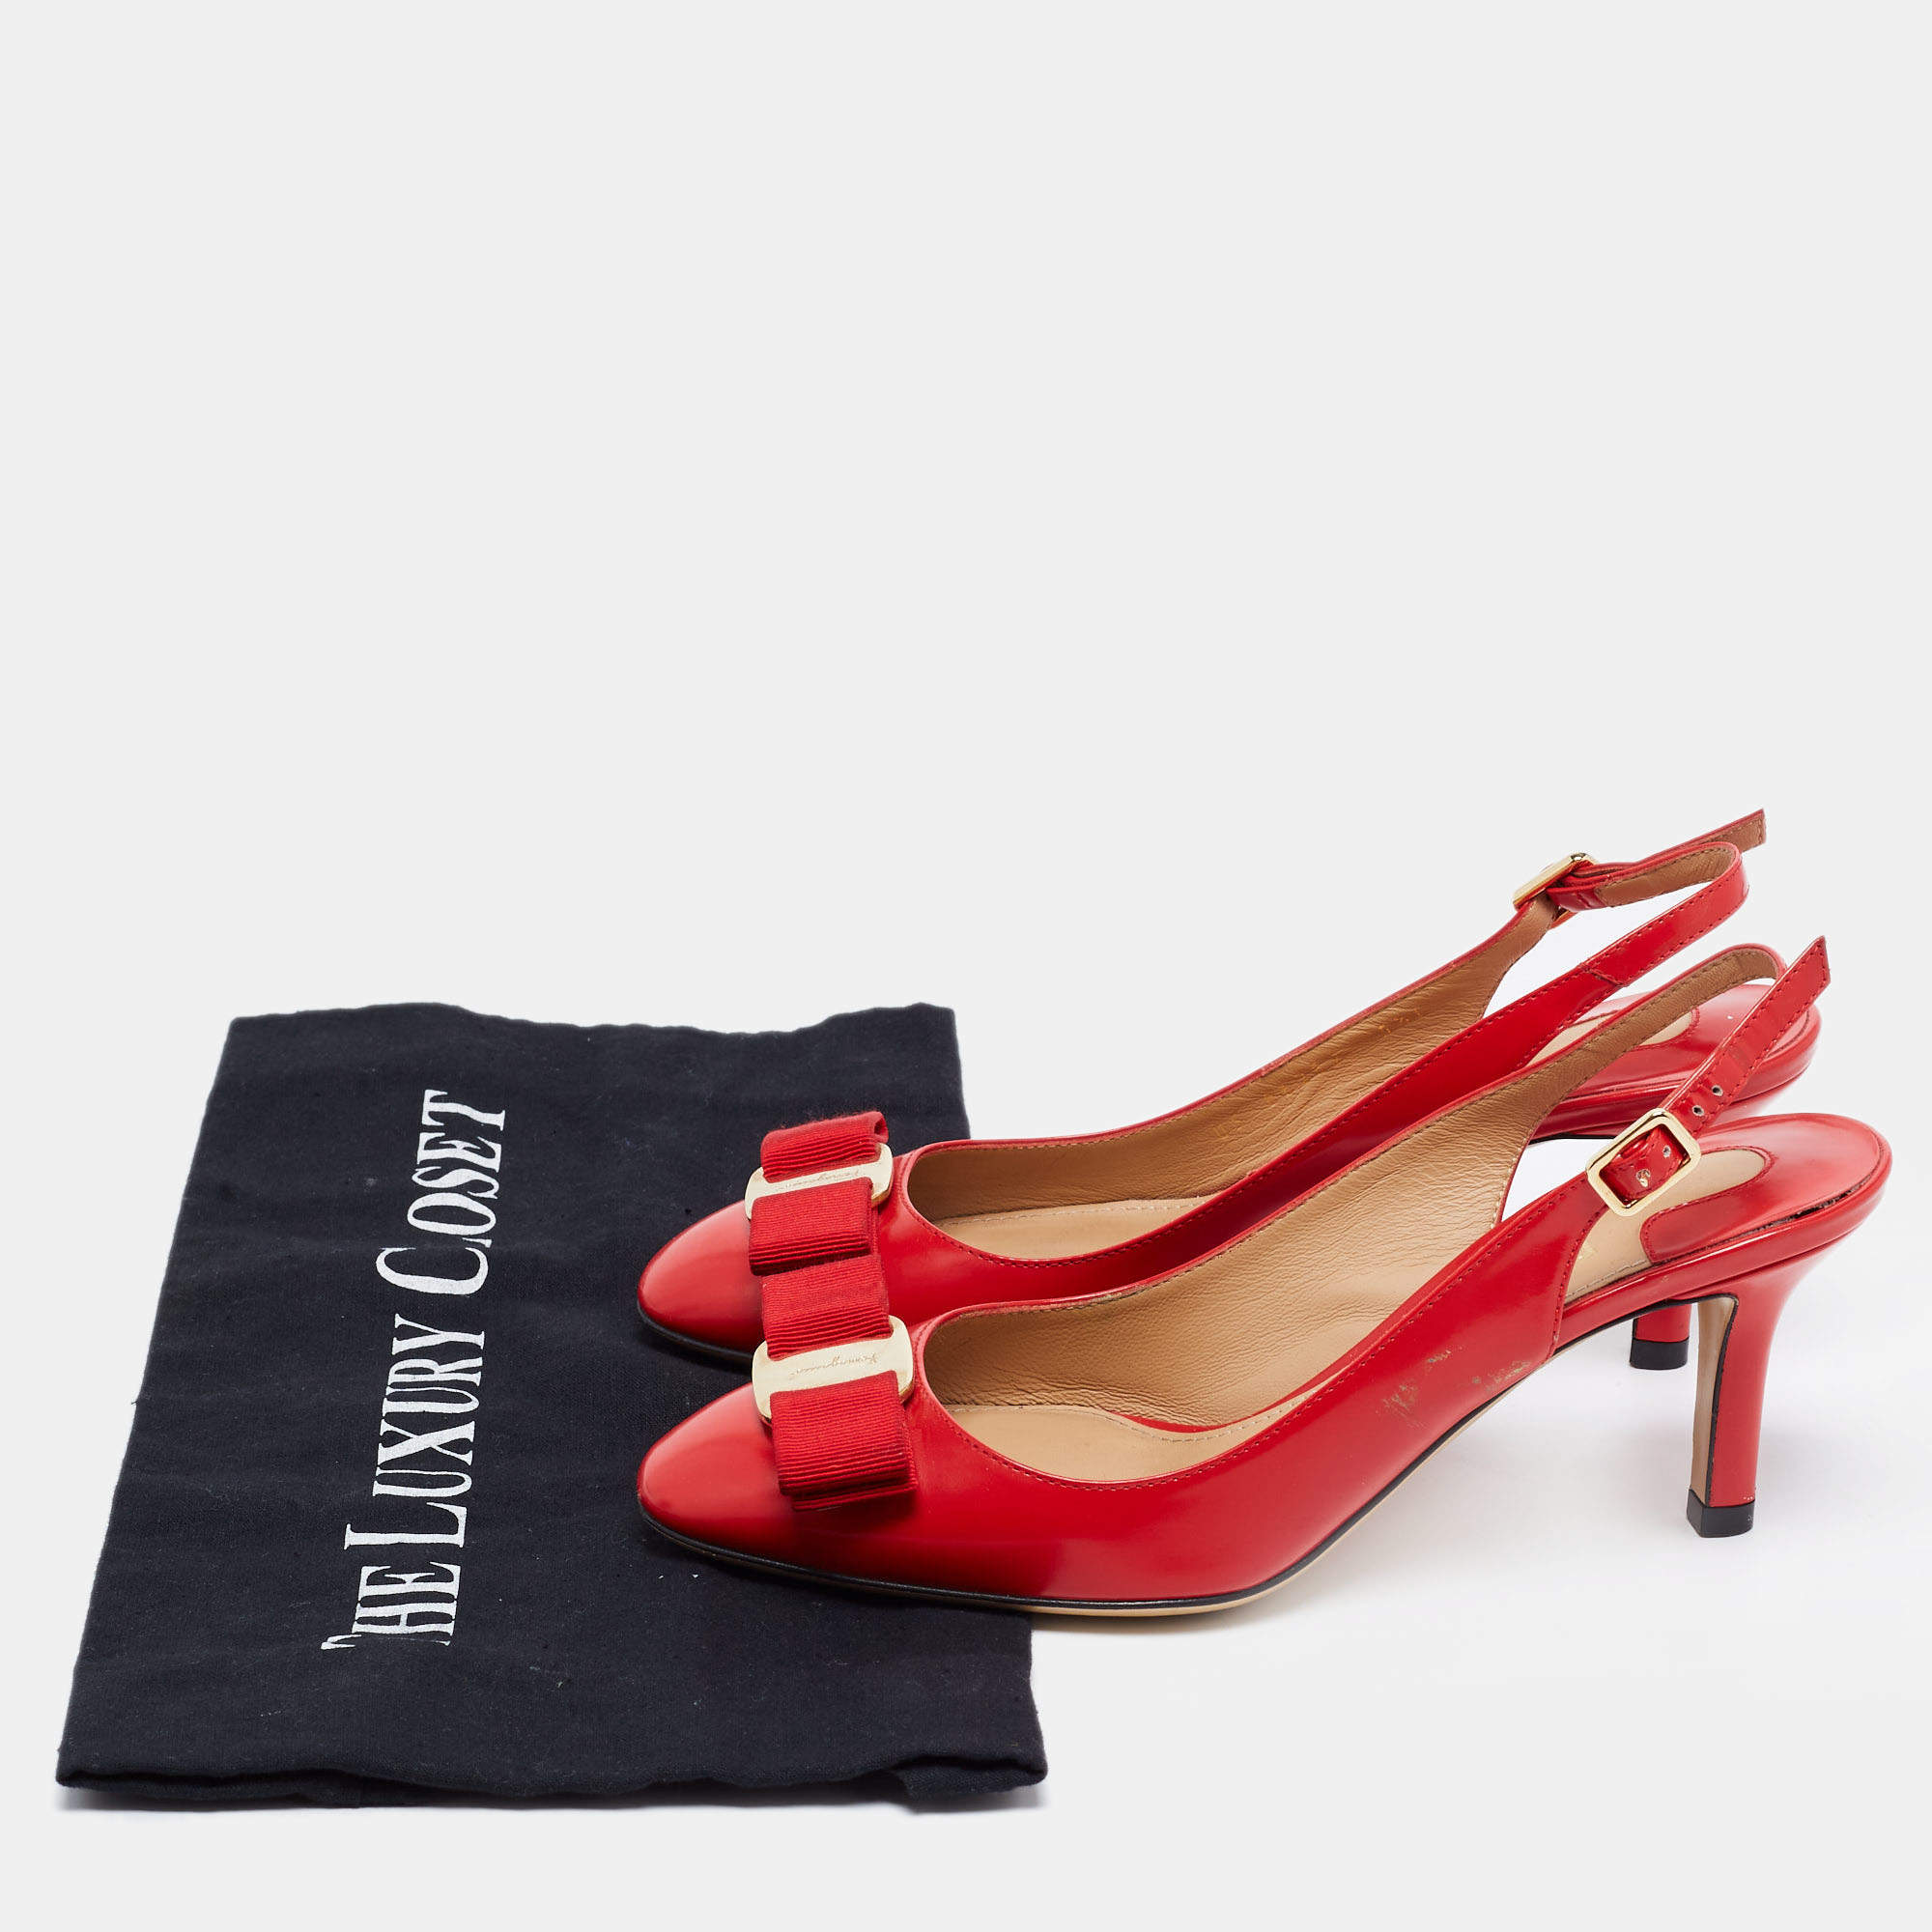 The Luxury Bargains - Salvatore Ferragamo • Red pumps • Size 9 fits 39 • Brand  new • Selling price: 400$🔸you can pay in 2 monthly installments🔸free  shipping in Nigeria #satvatoreferragamo #pumps #